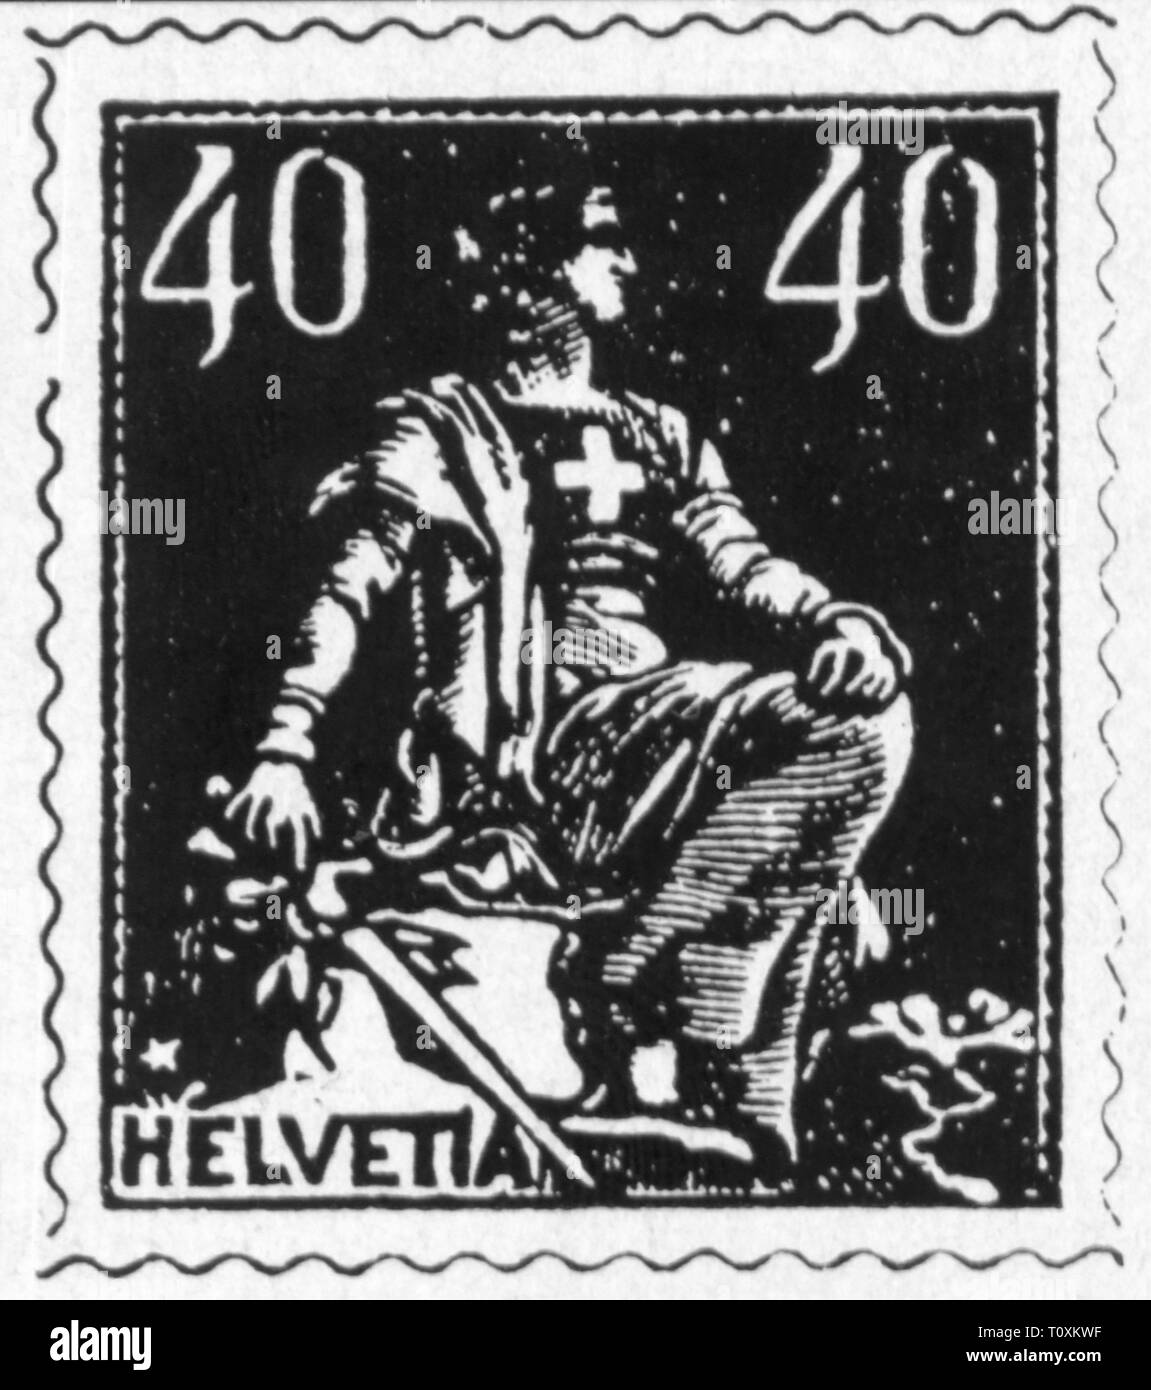 mail, postage stamps, Switzerland, 40 Rappen postage stamp, series sitting Helvetia, date of issue: November 1918, Additional-Rights-Clearance-Info-Not-Available Stock Photo